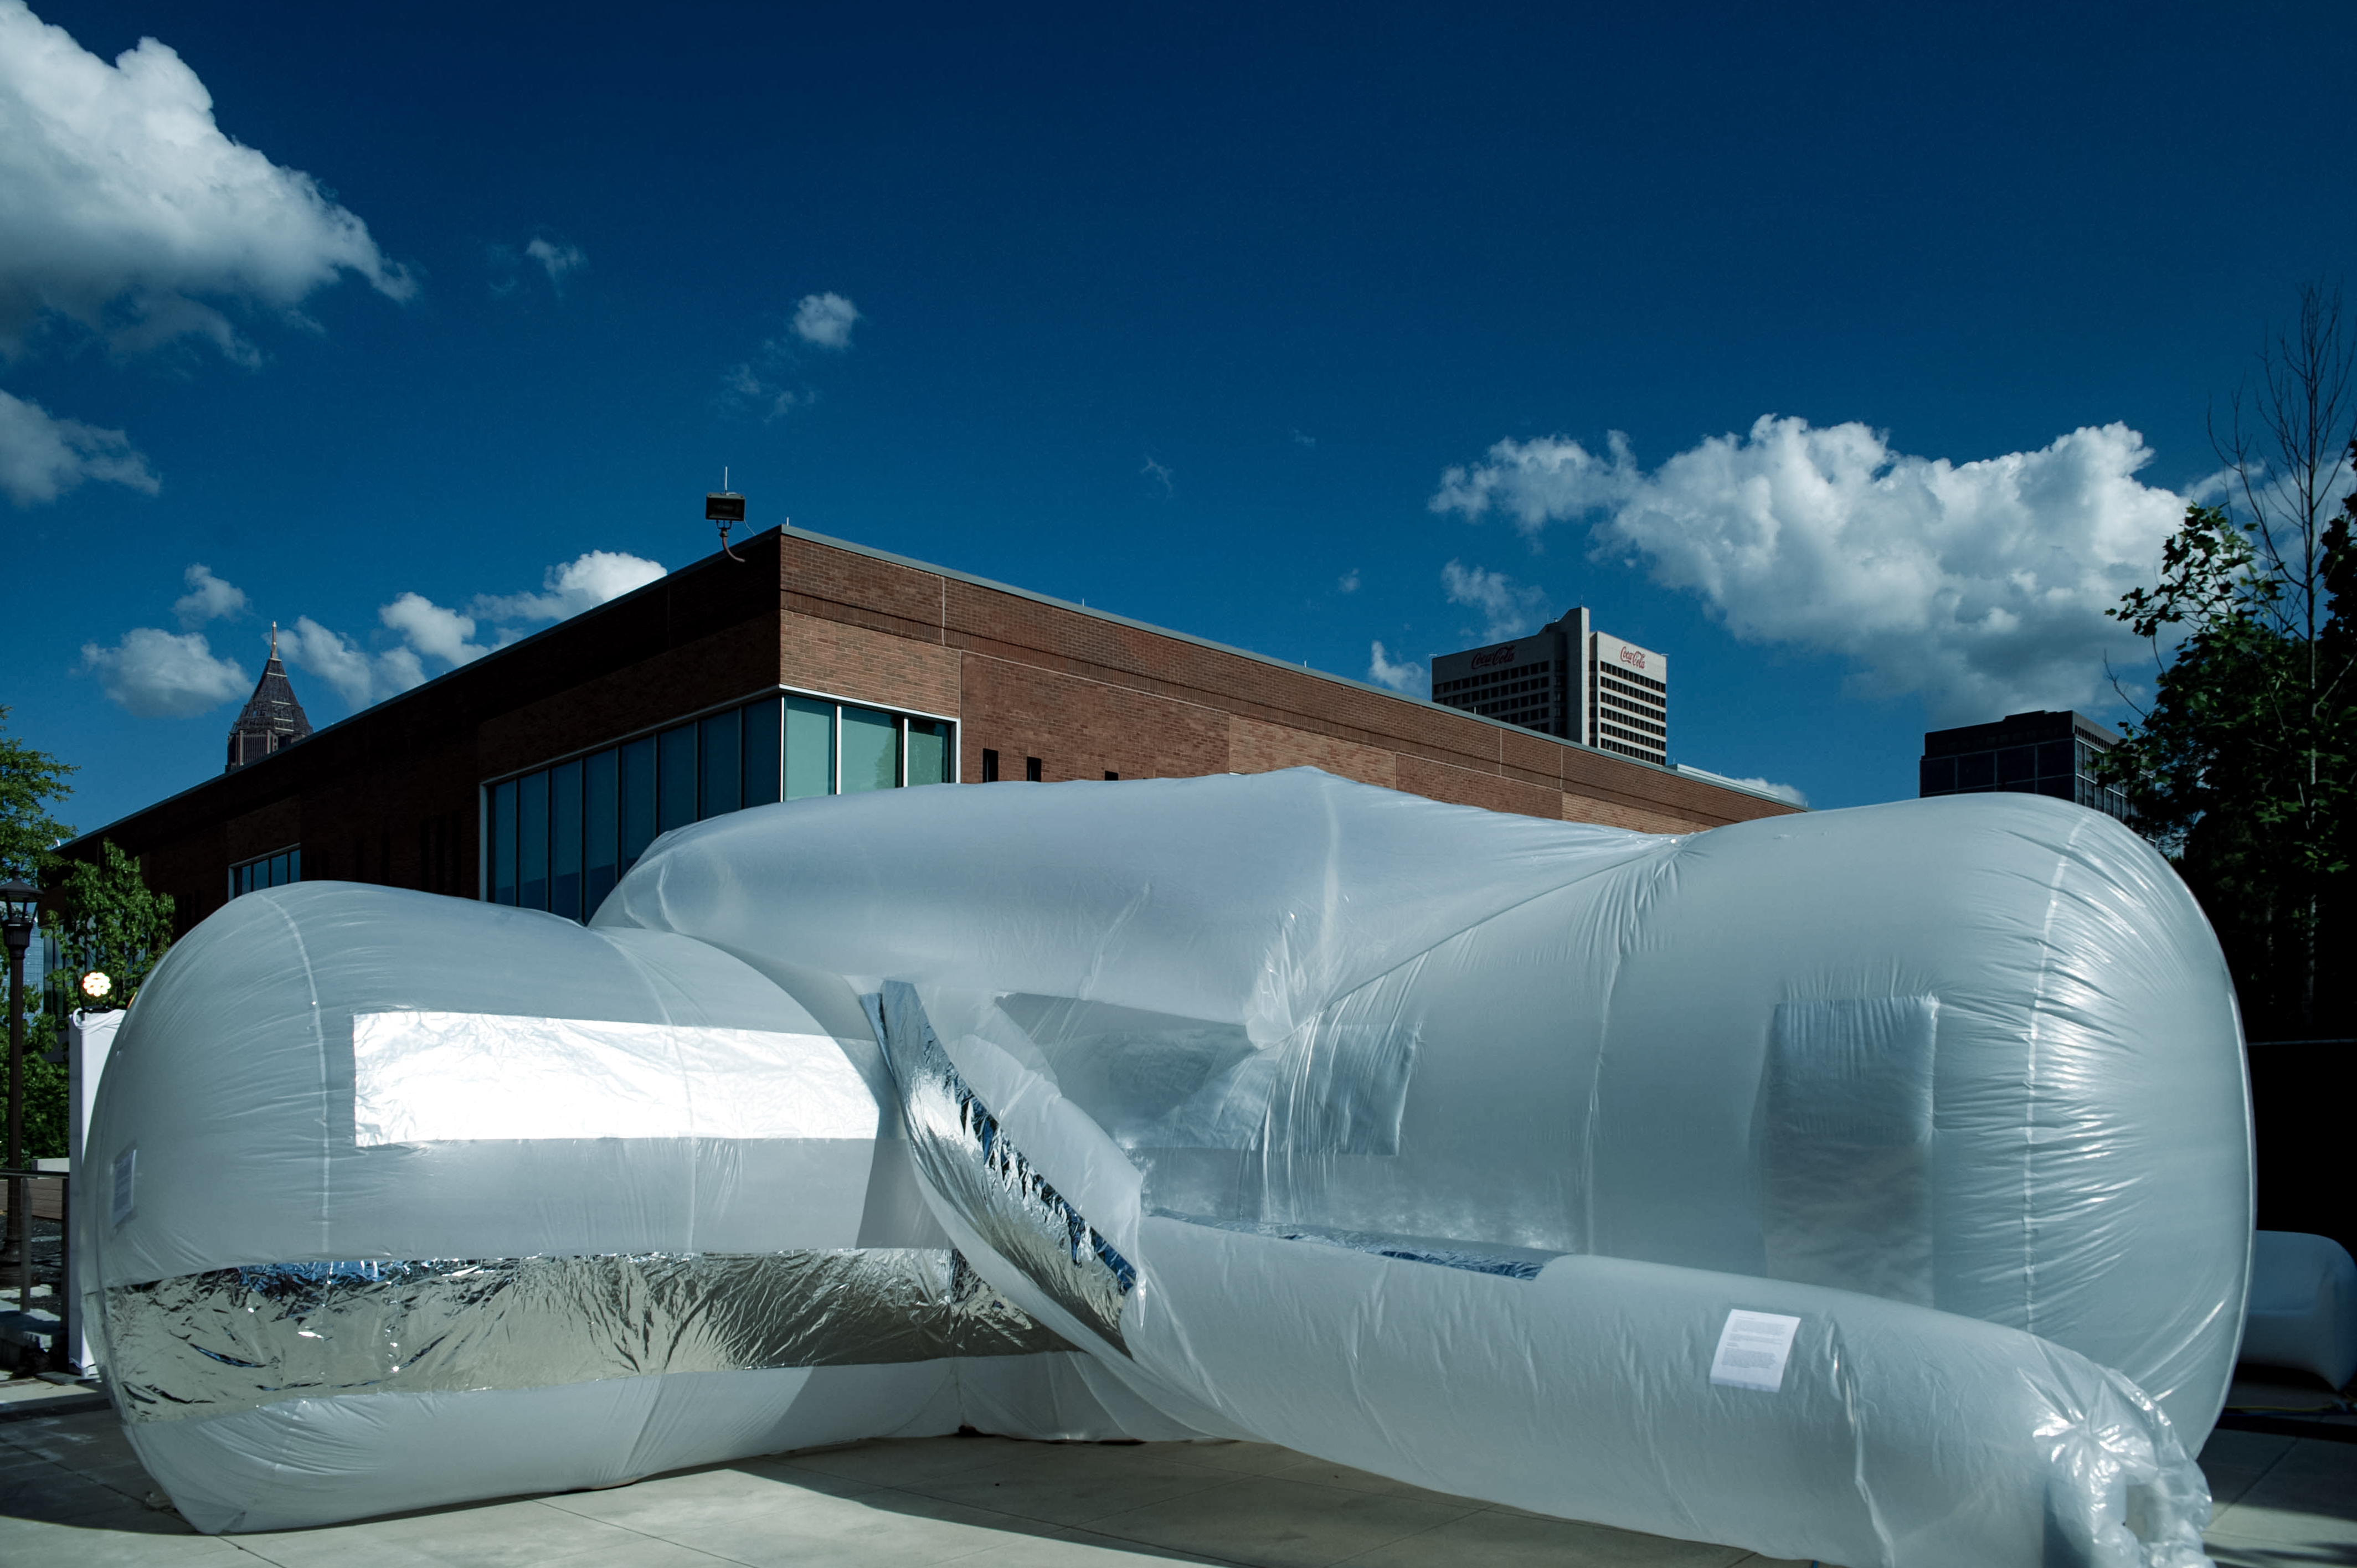 View from the outside of a large inflatable, a big tube about 8 feet in diameter. It makes a right angle bend and the viewer is in the inside of the 'elbow' angle. There are some smaller tubes twisting around the outside. The inflatable is white plastic with some stripes of silver foil